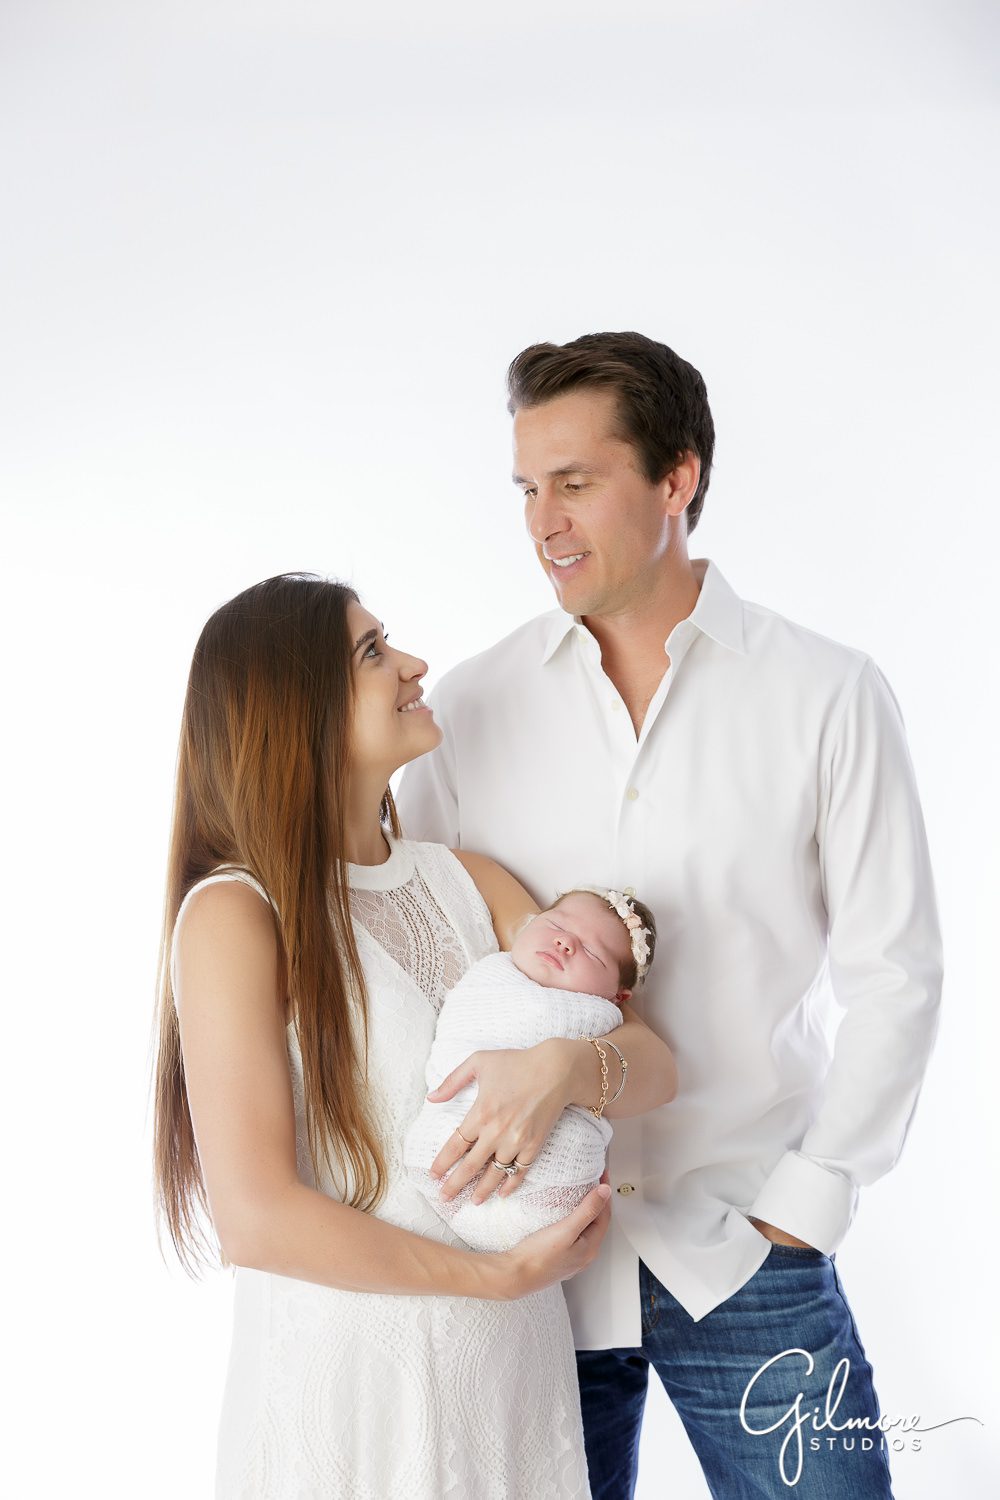 Orange County Newborn, parents, mom, dad, sleeping baby, jeans, shirt, white outfit, dress, blankets